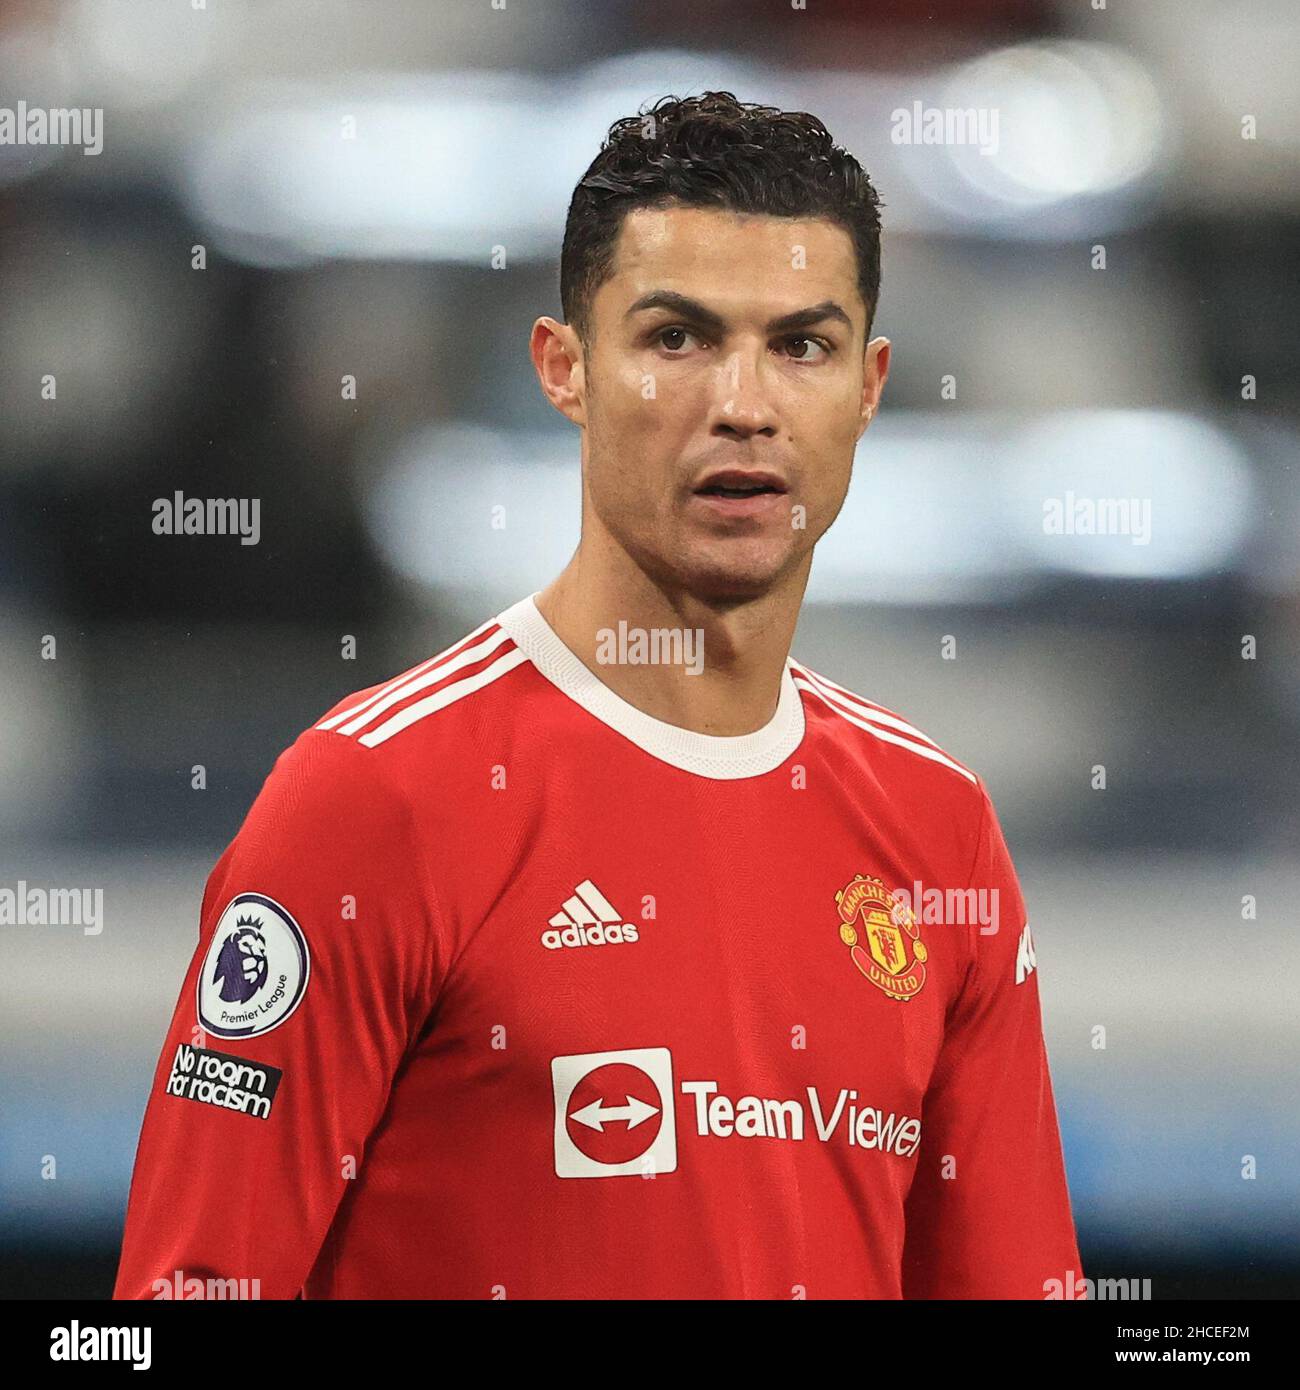 Newcastle, UK. 27th Dec, 2021. Cristiano Ronaldo #7 of Manchester United during the game in Newcastle, United Kingdom on 12/27/2021. (Photo by Mark Cosgrove/News Images/Sipa USA) Credit: Sipa USA/Alamy Live News Stock Photo